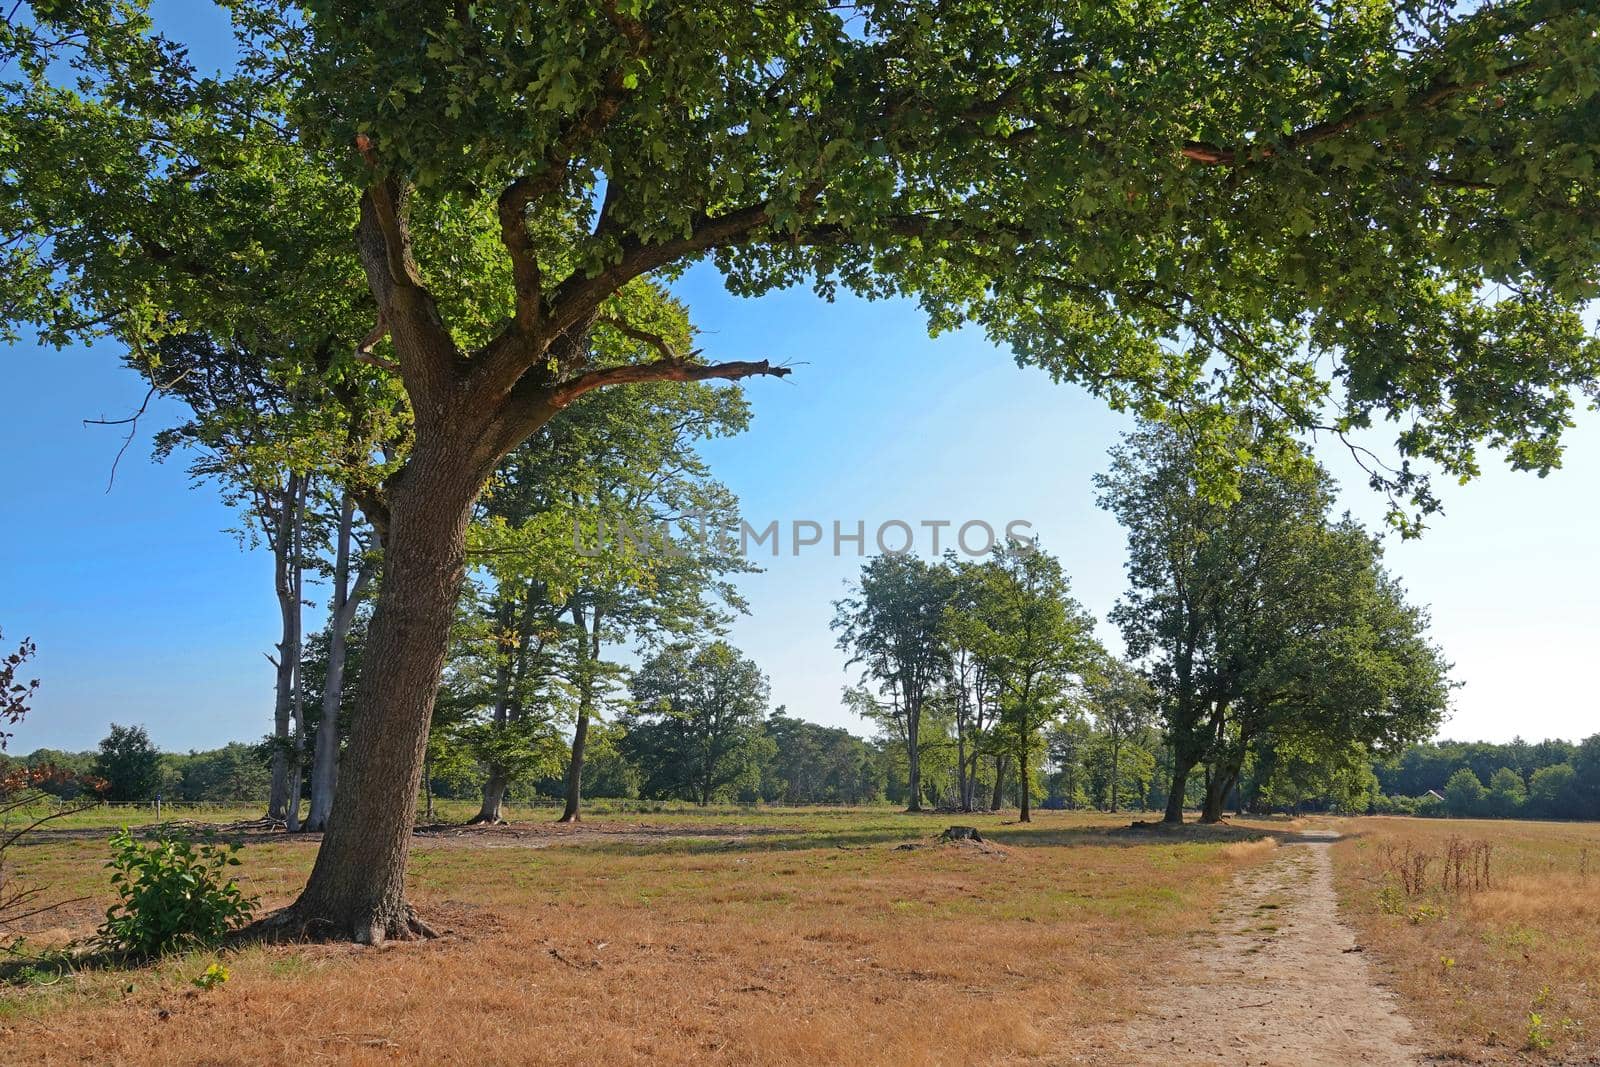 Hiking trail through dry grassland. An oak tree hangs a branch as a canopy over the path